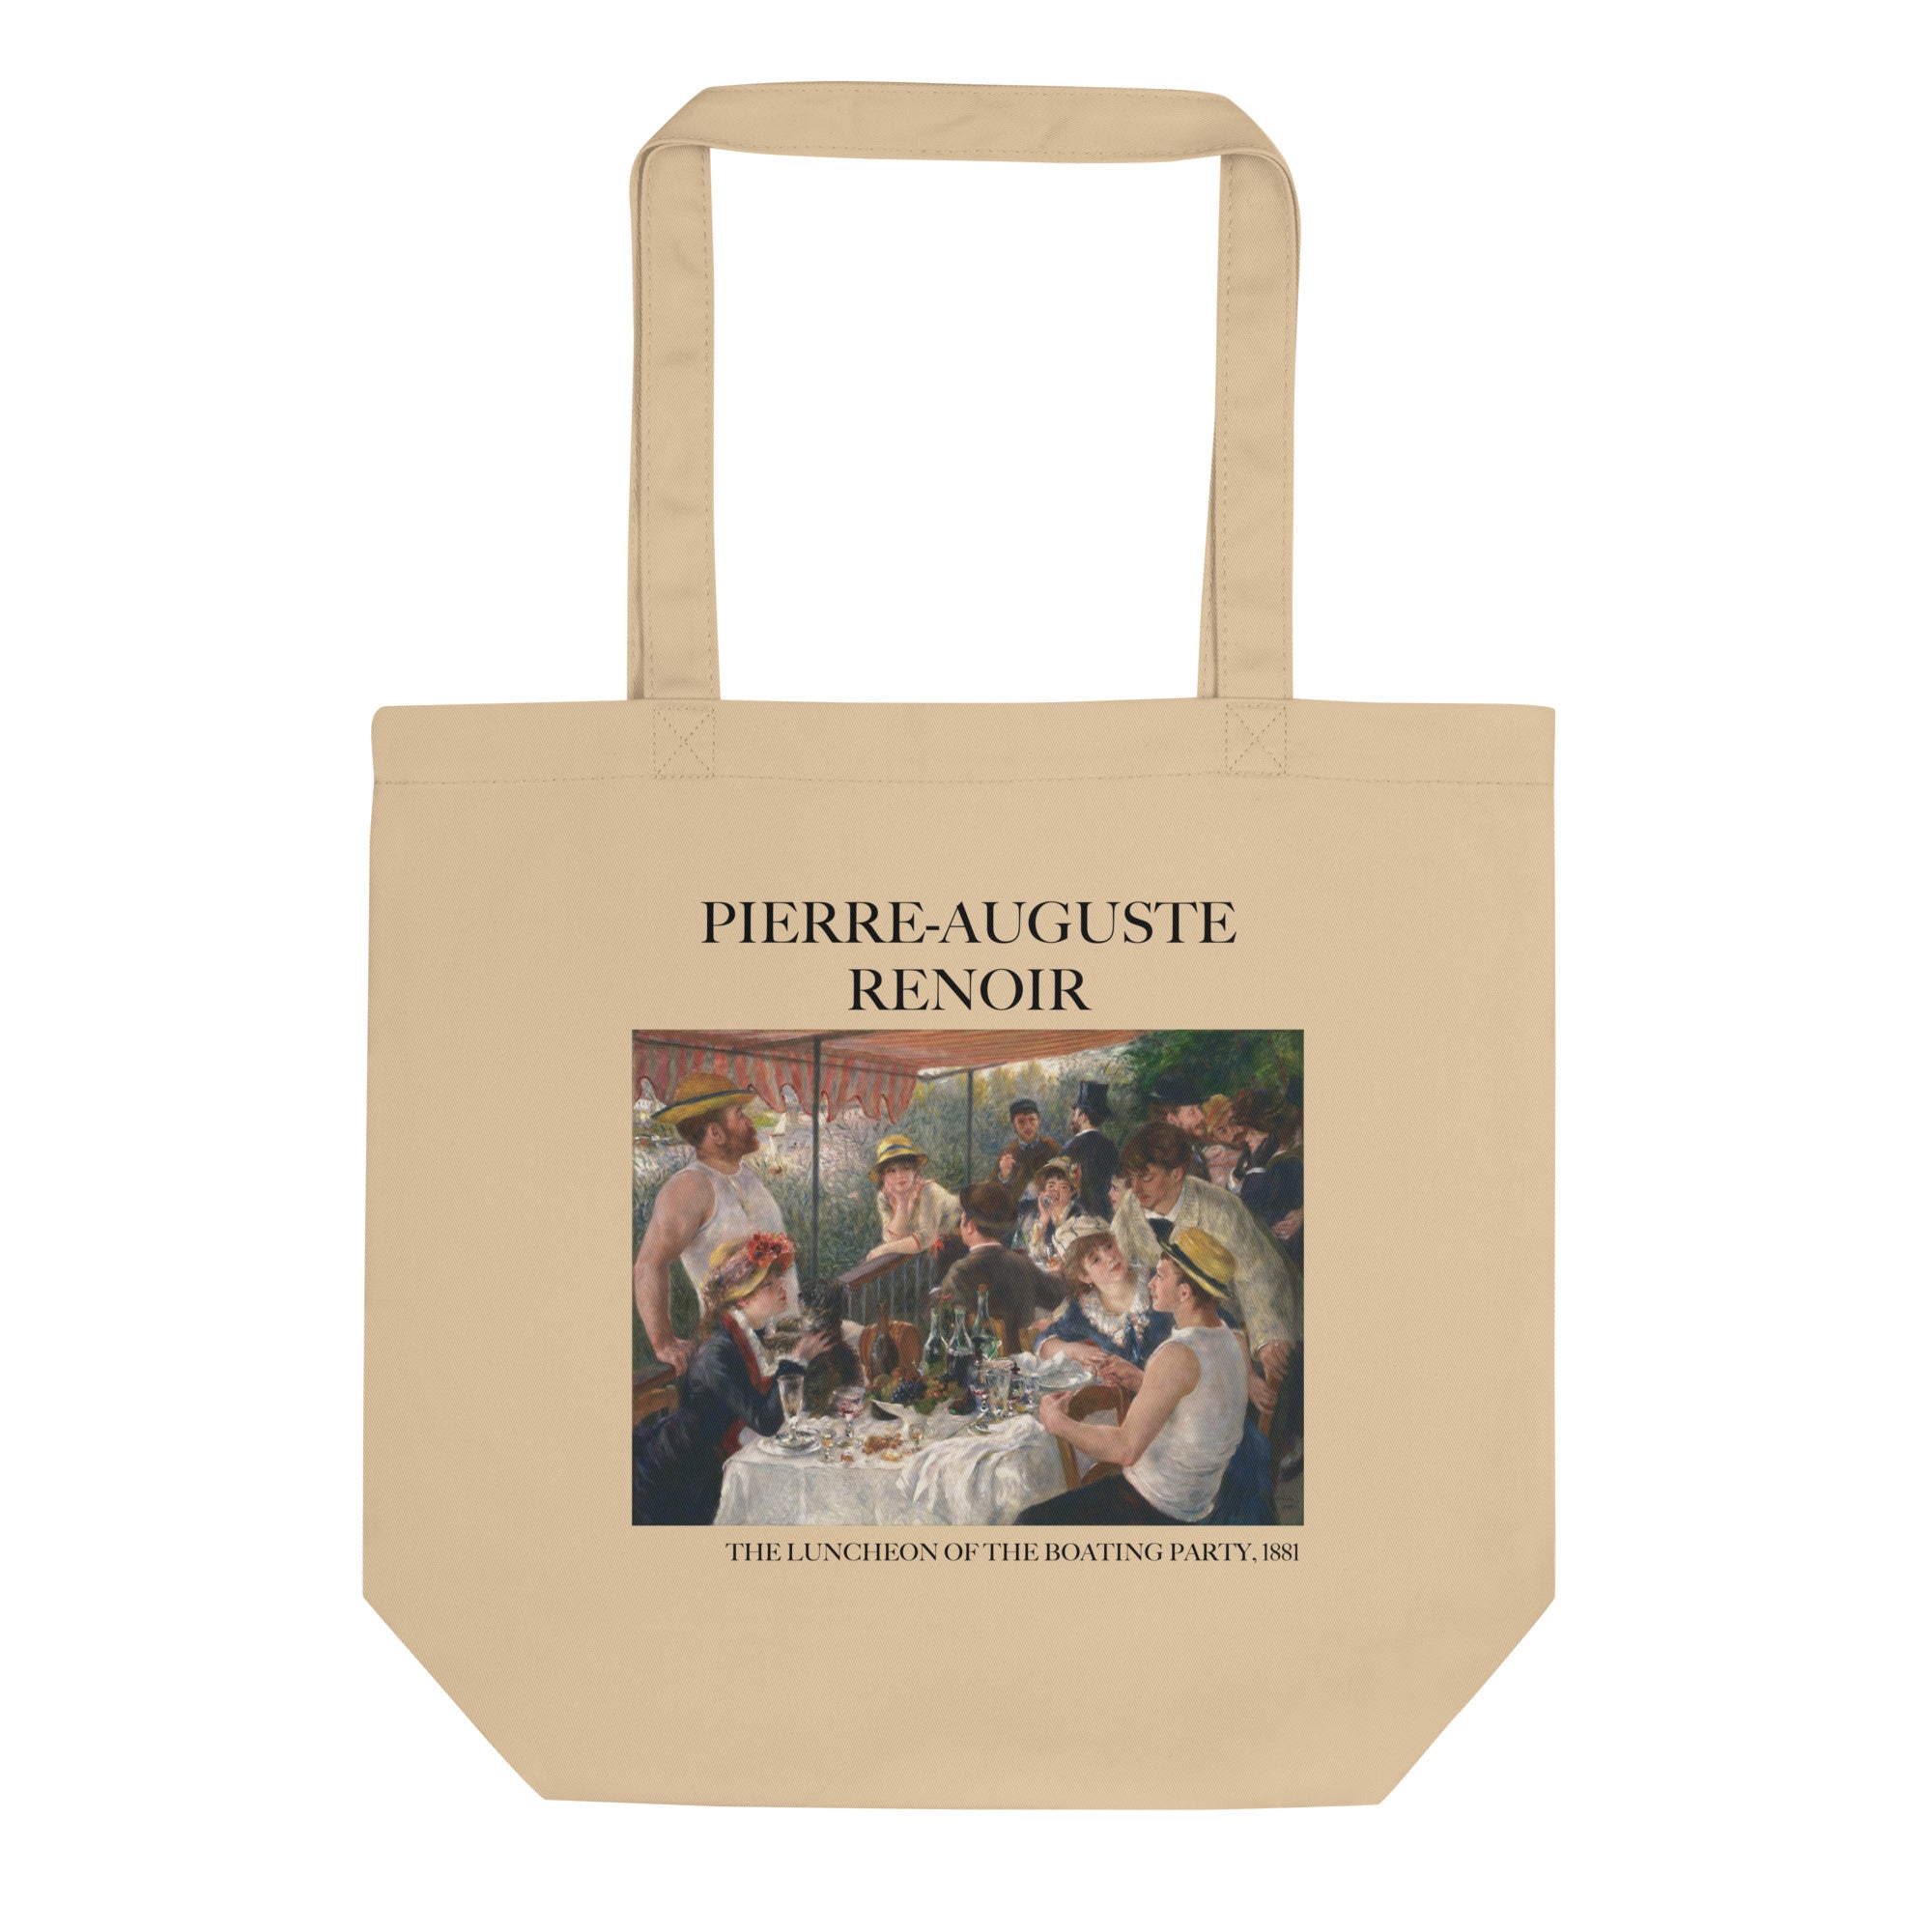 Pierre-Auguste Renoir 'The Luncheon of the Boating Party' Famous Painting Totebag | Eco Friendly Art Tote Bag